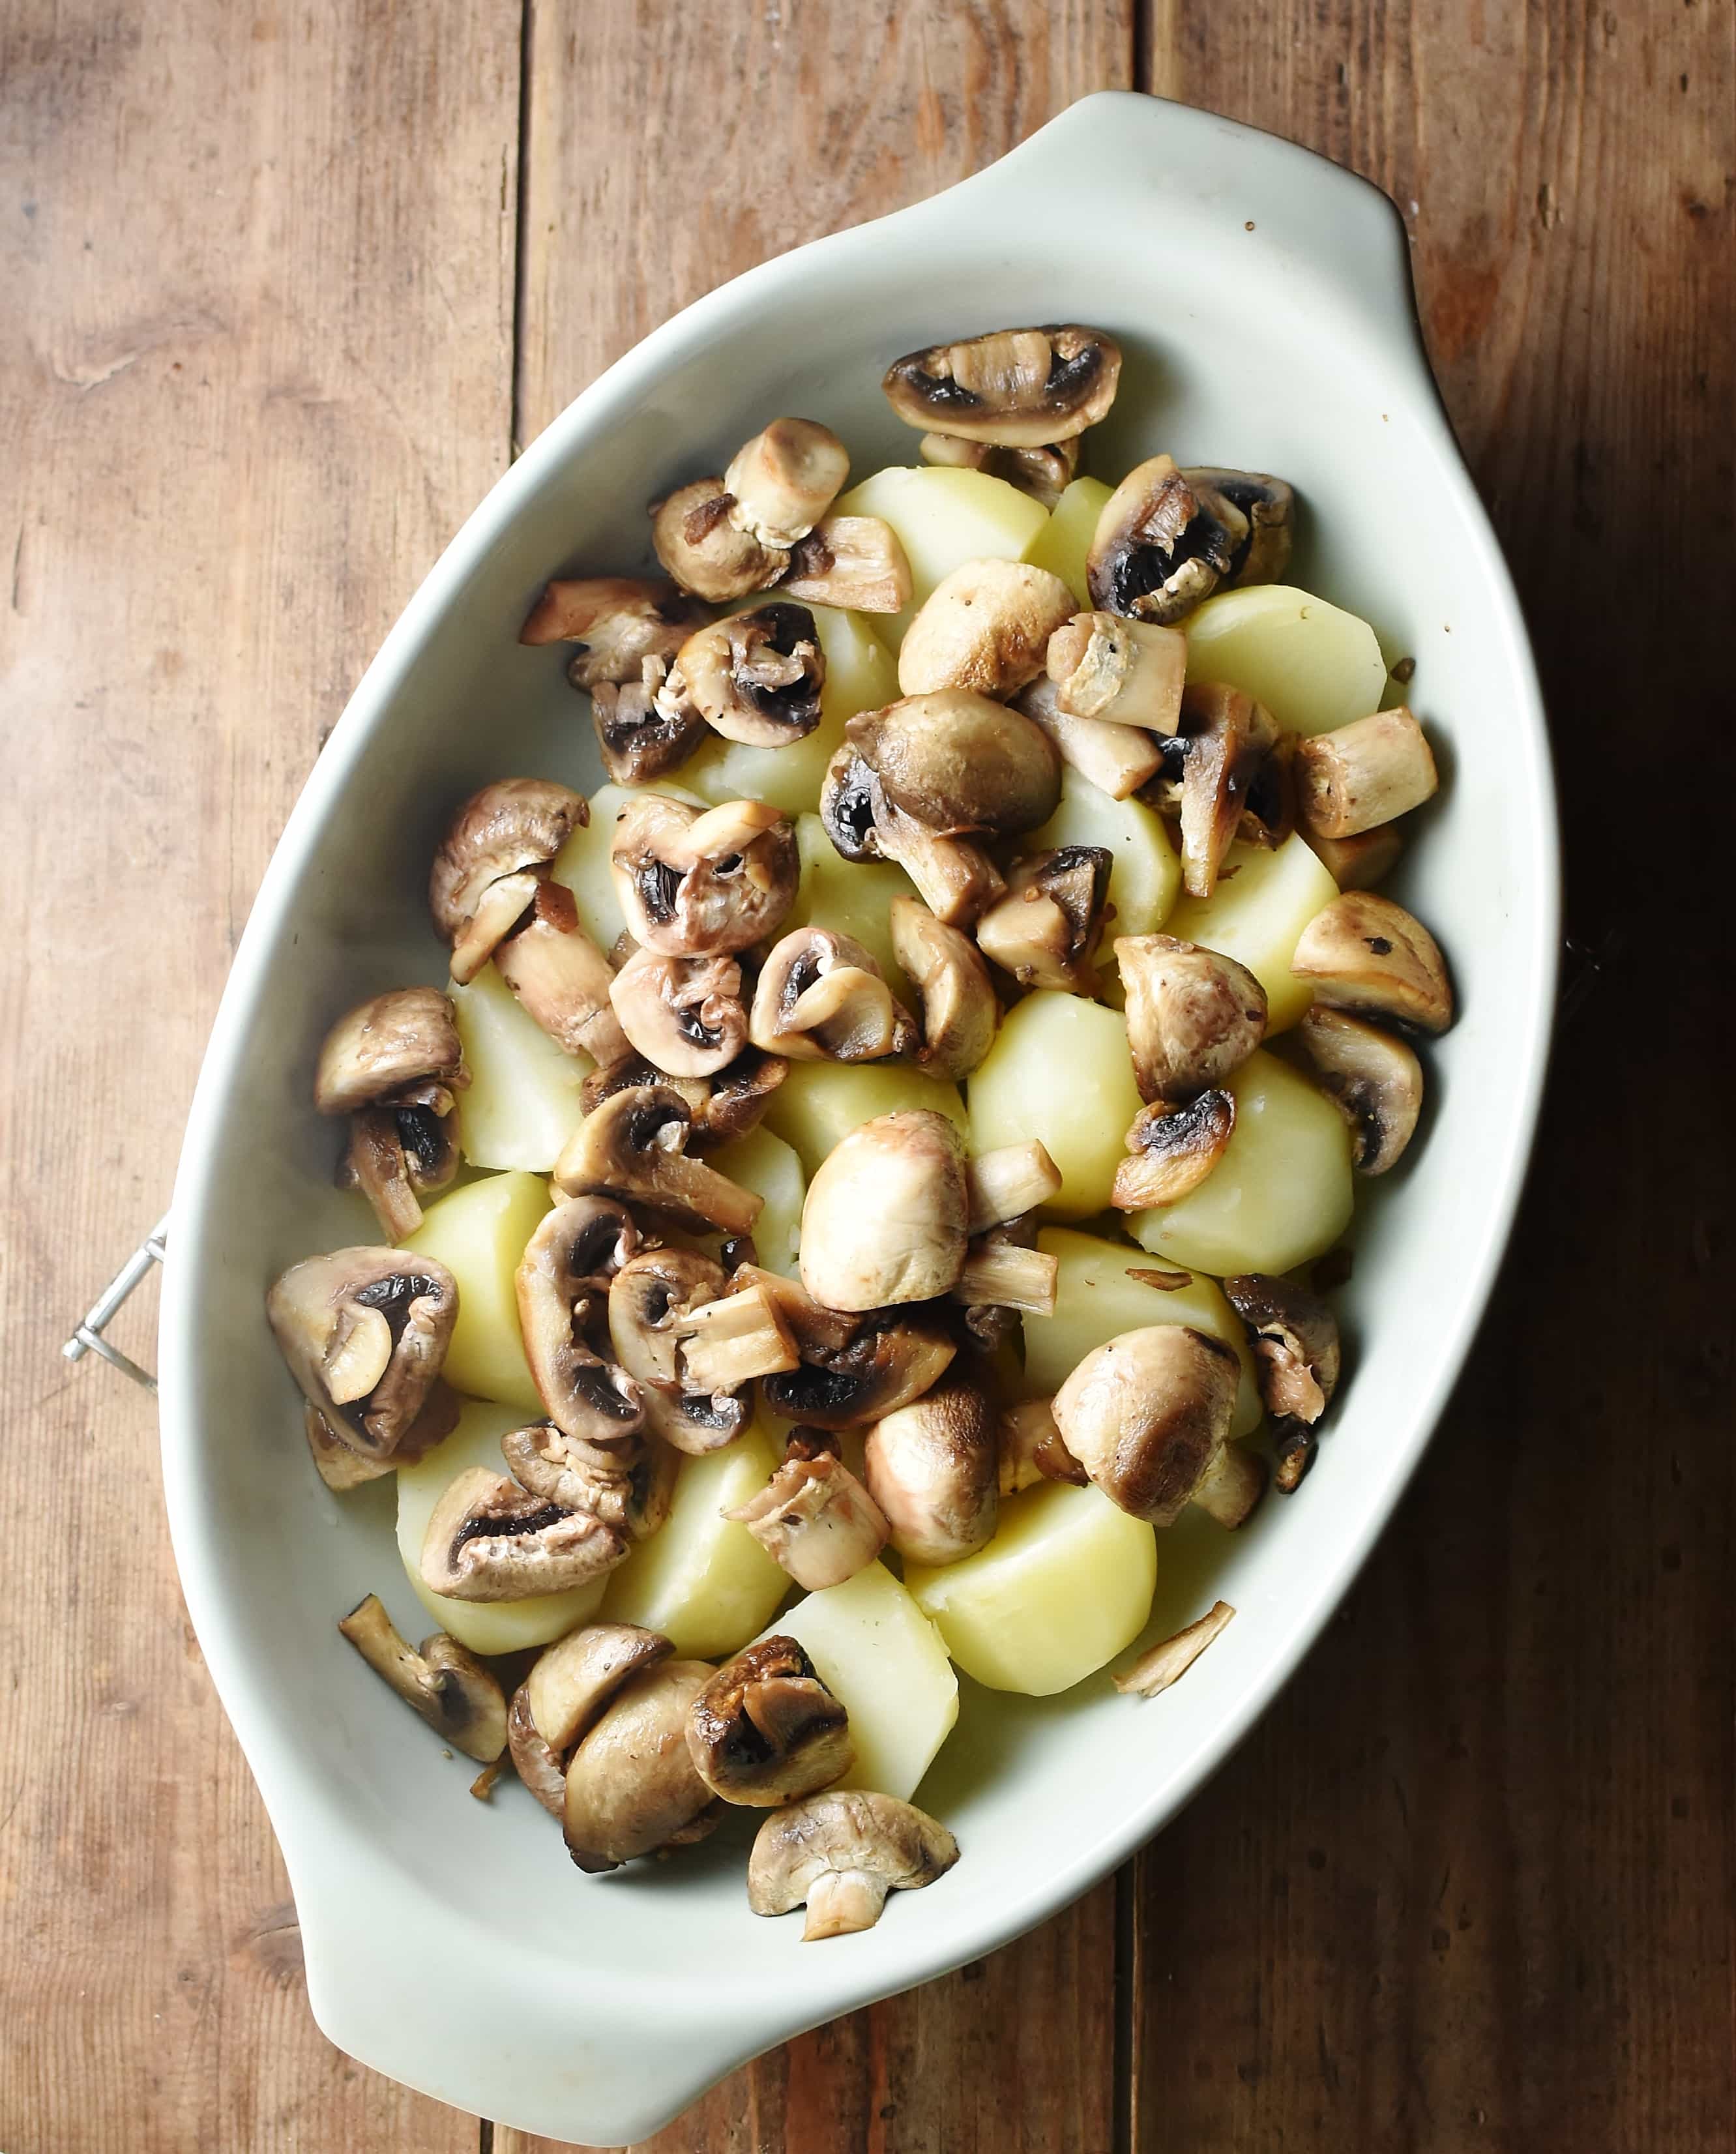 Potato pieces and chopped mushrooms in oval dish.